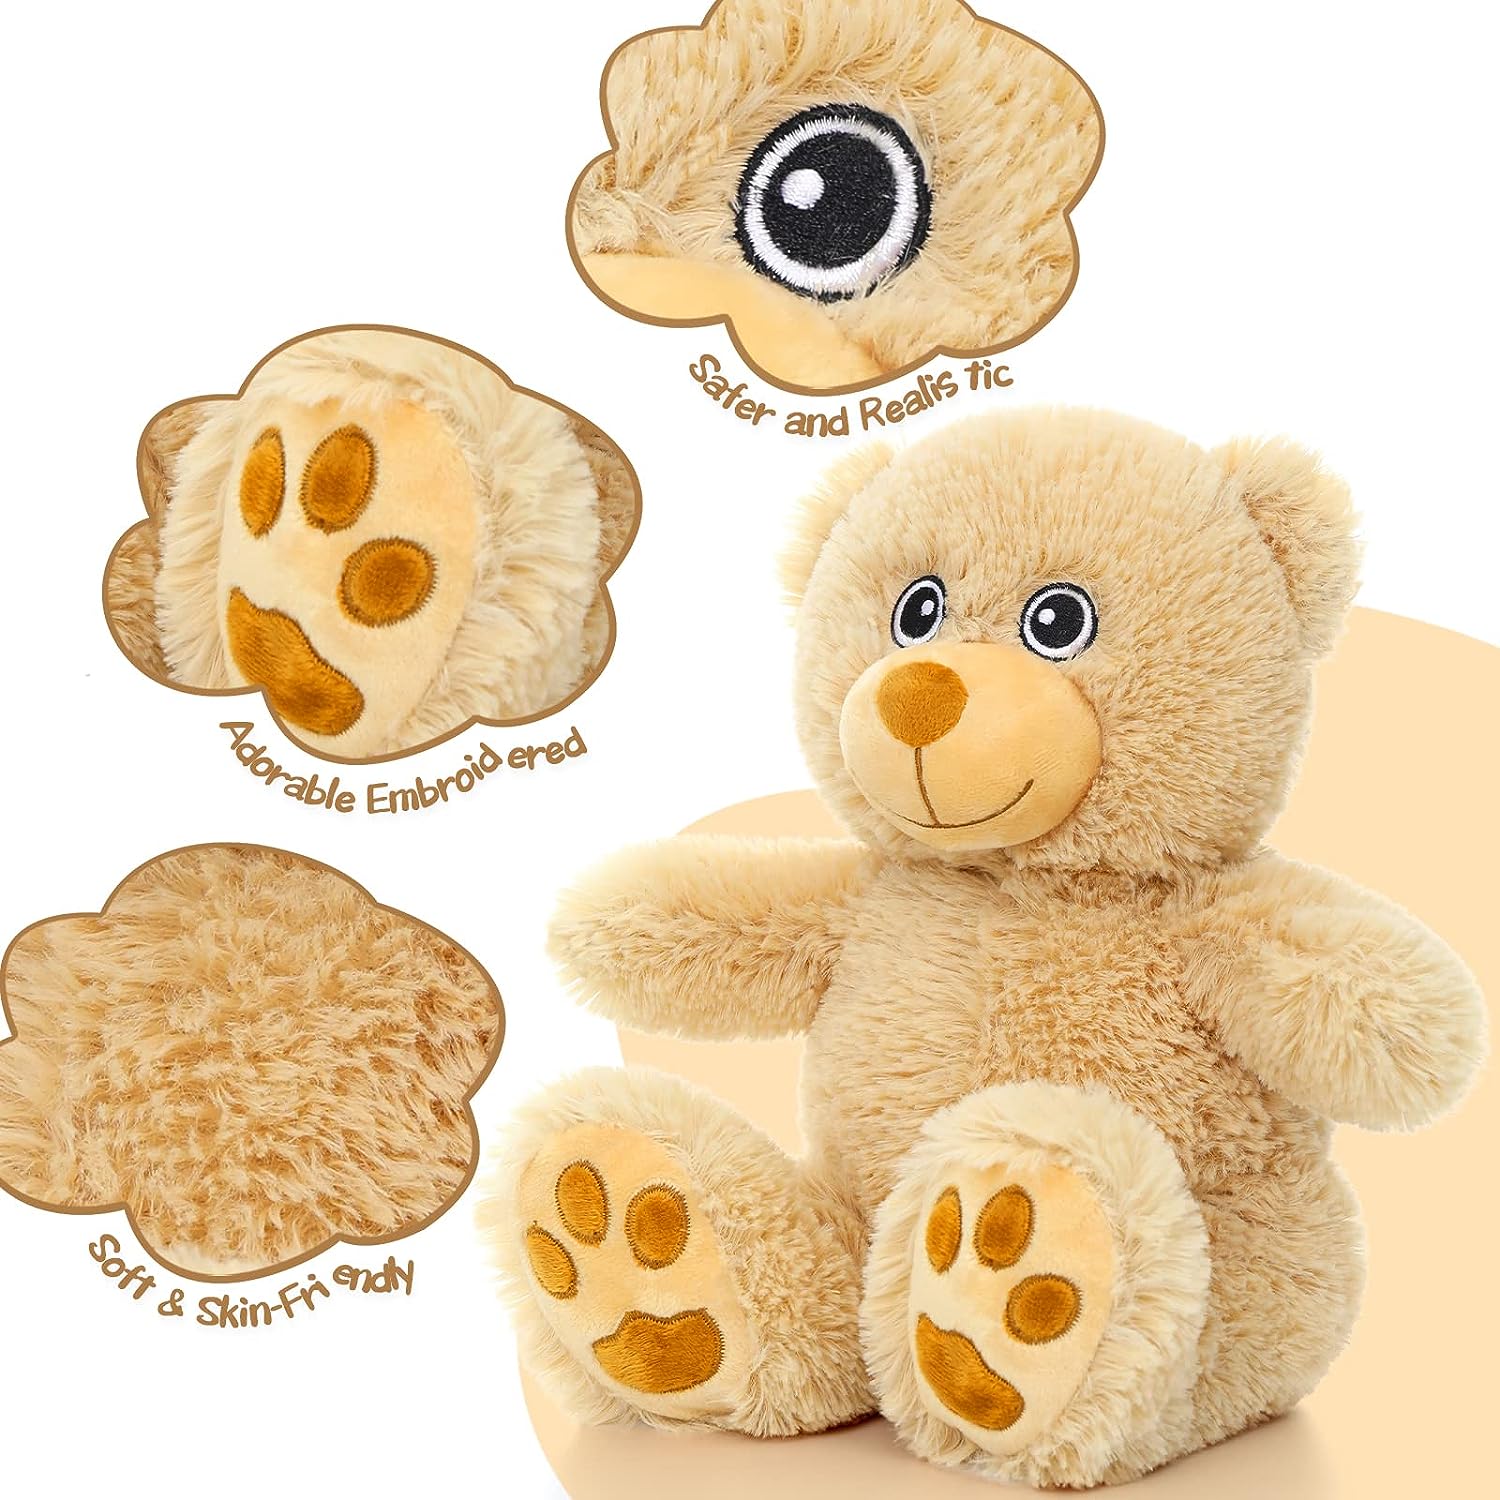 5 Piece Teddy Bears Plush Toy Set, 14 Inches